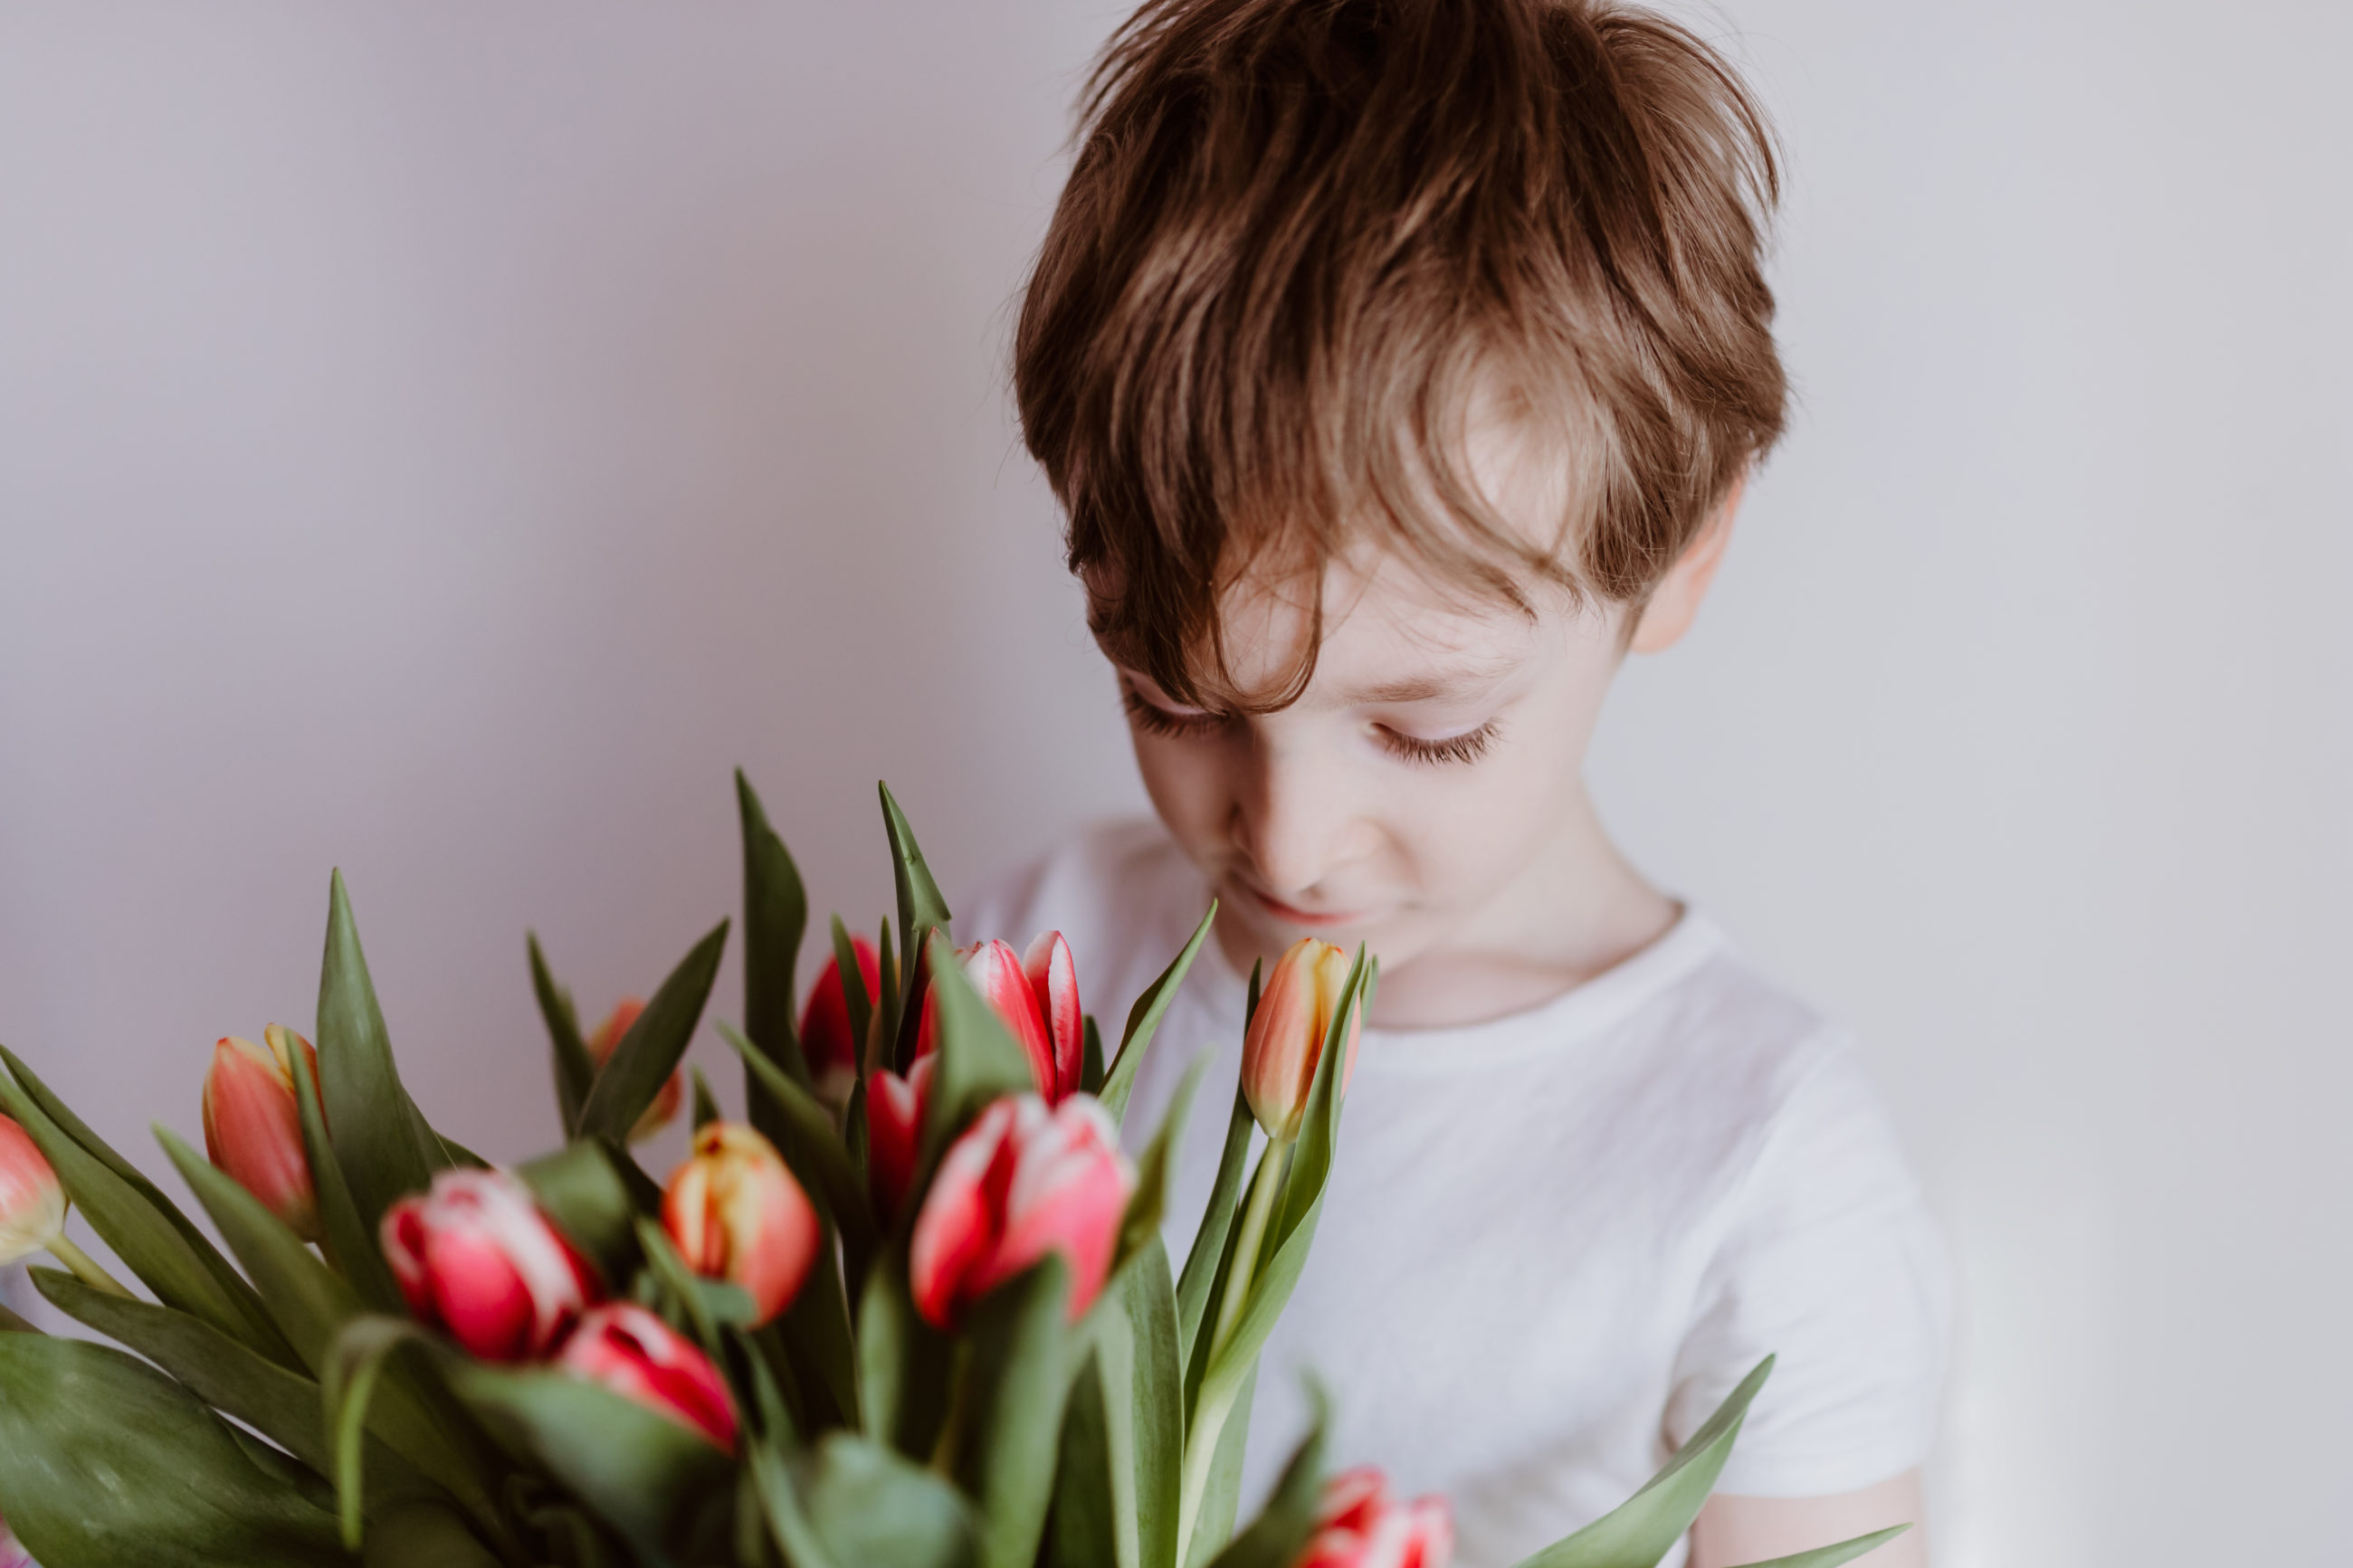 boy holding yellow tulips as gift for mom copy sp 2022 03 22 15 44 55 utc